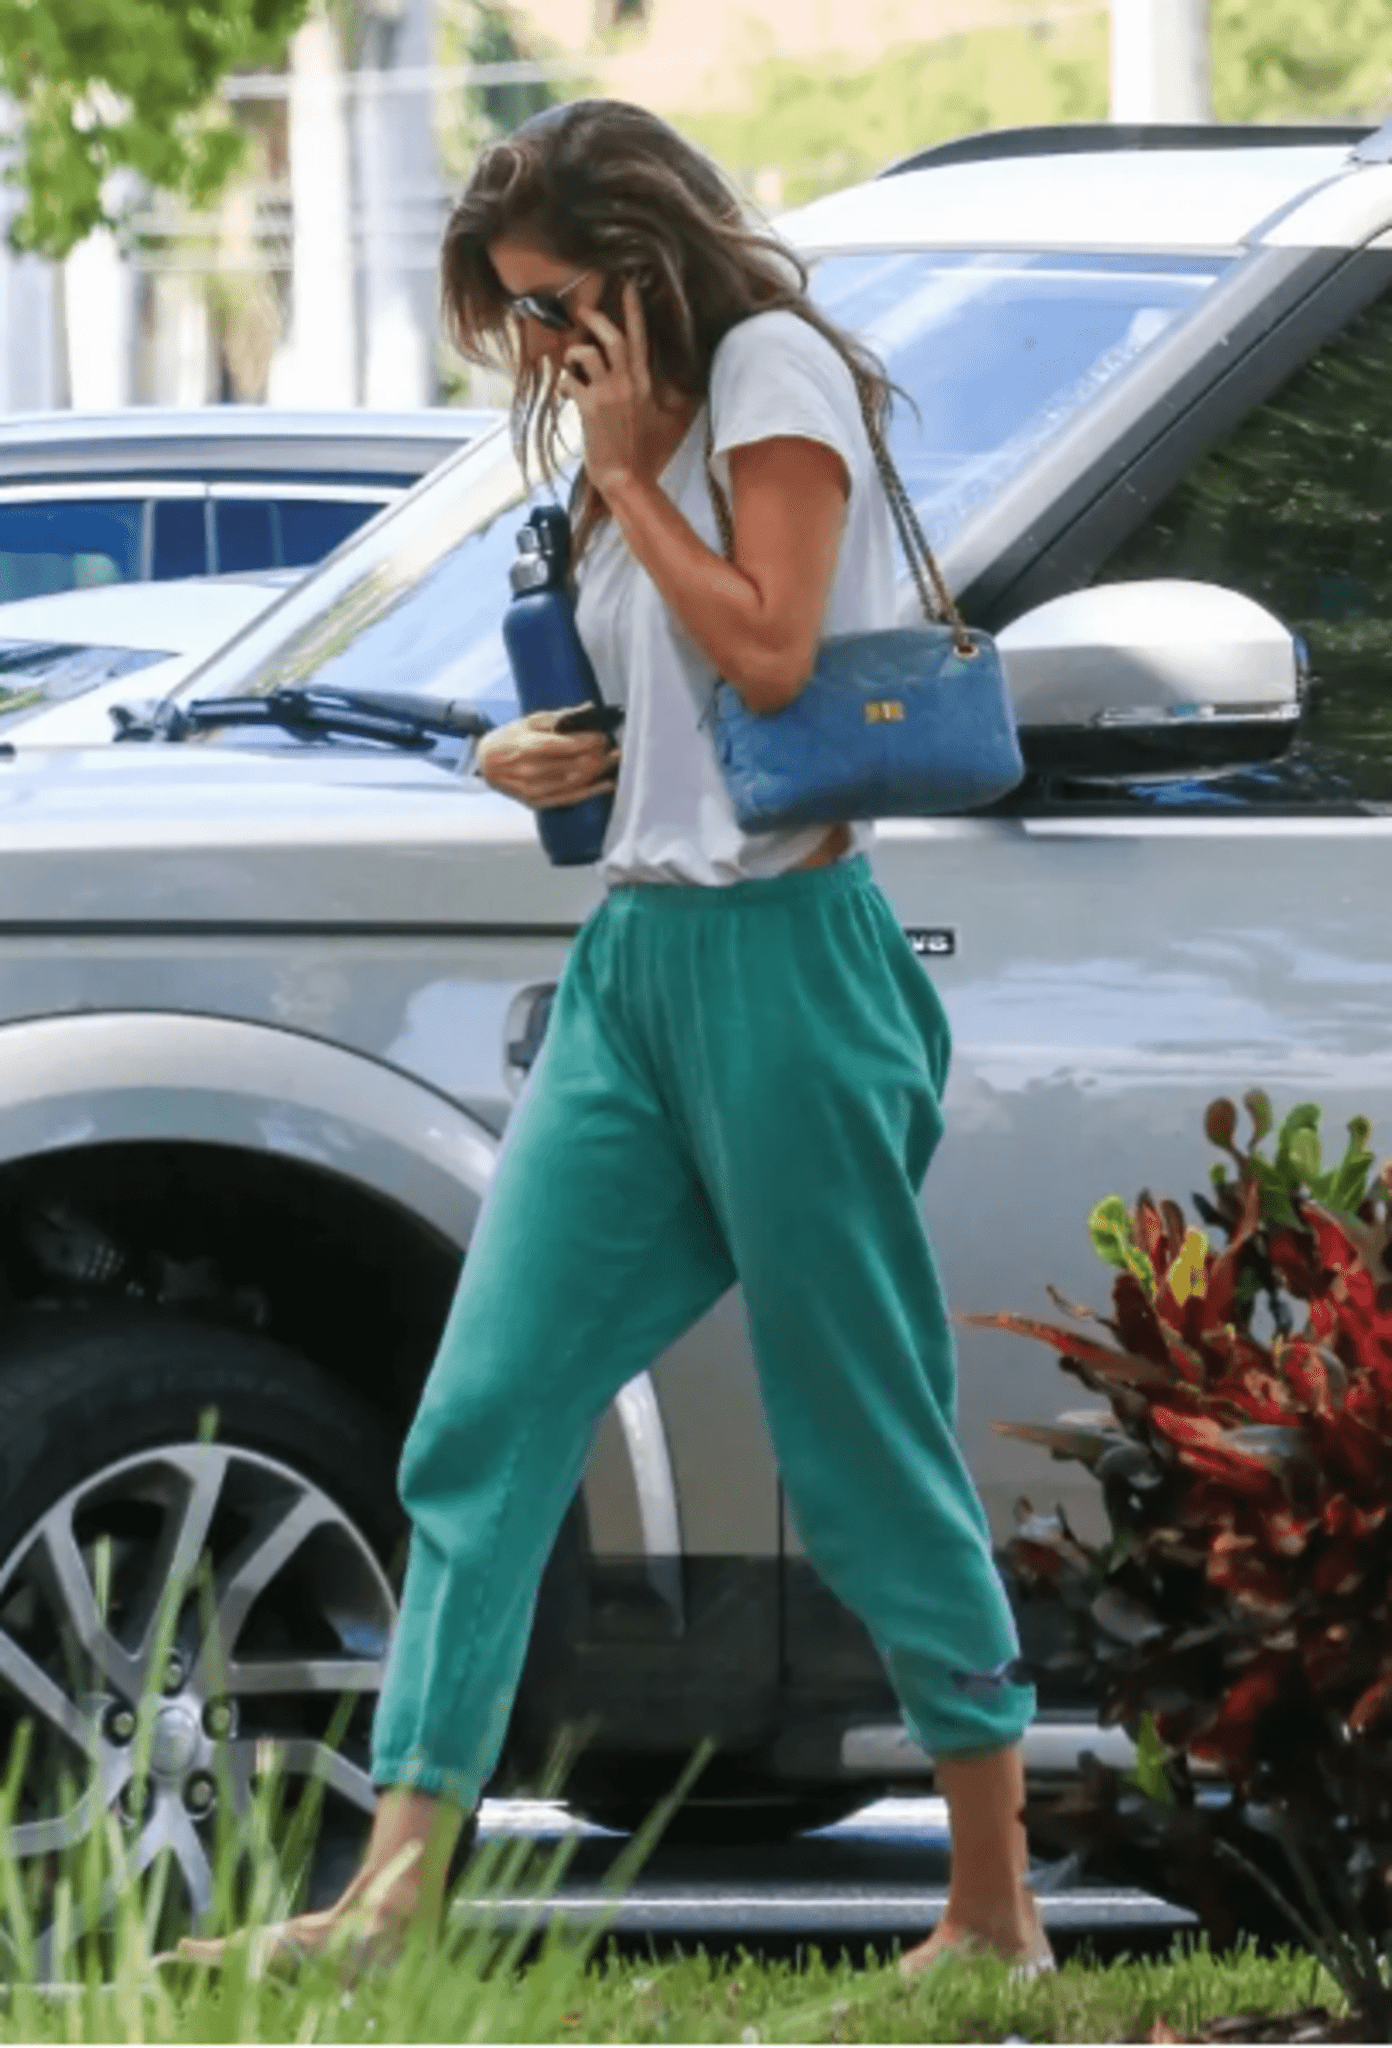 Gisele Bündchen was spotted for a second time in her Ayurvedic doctor's office.